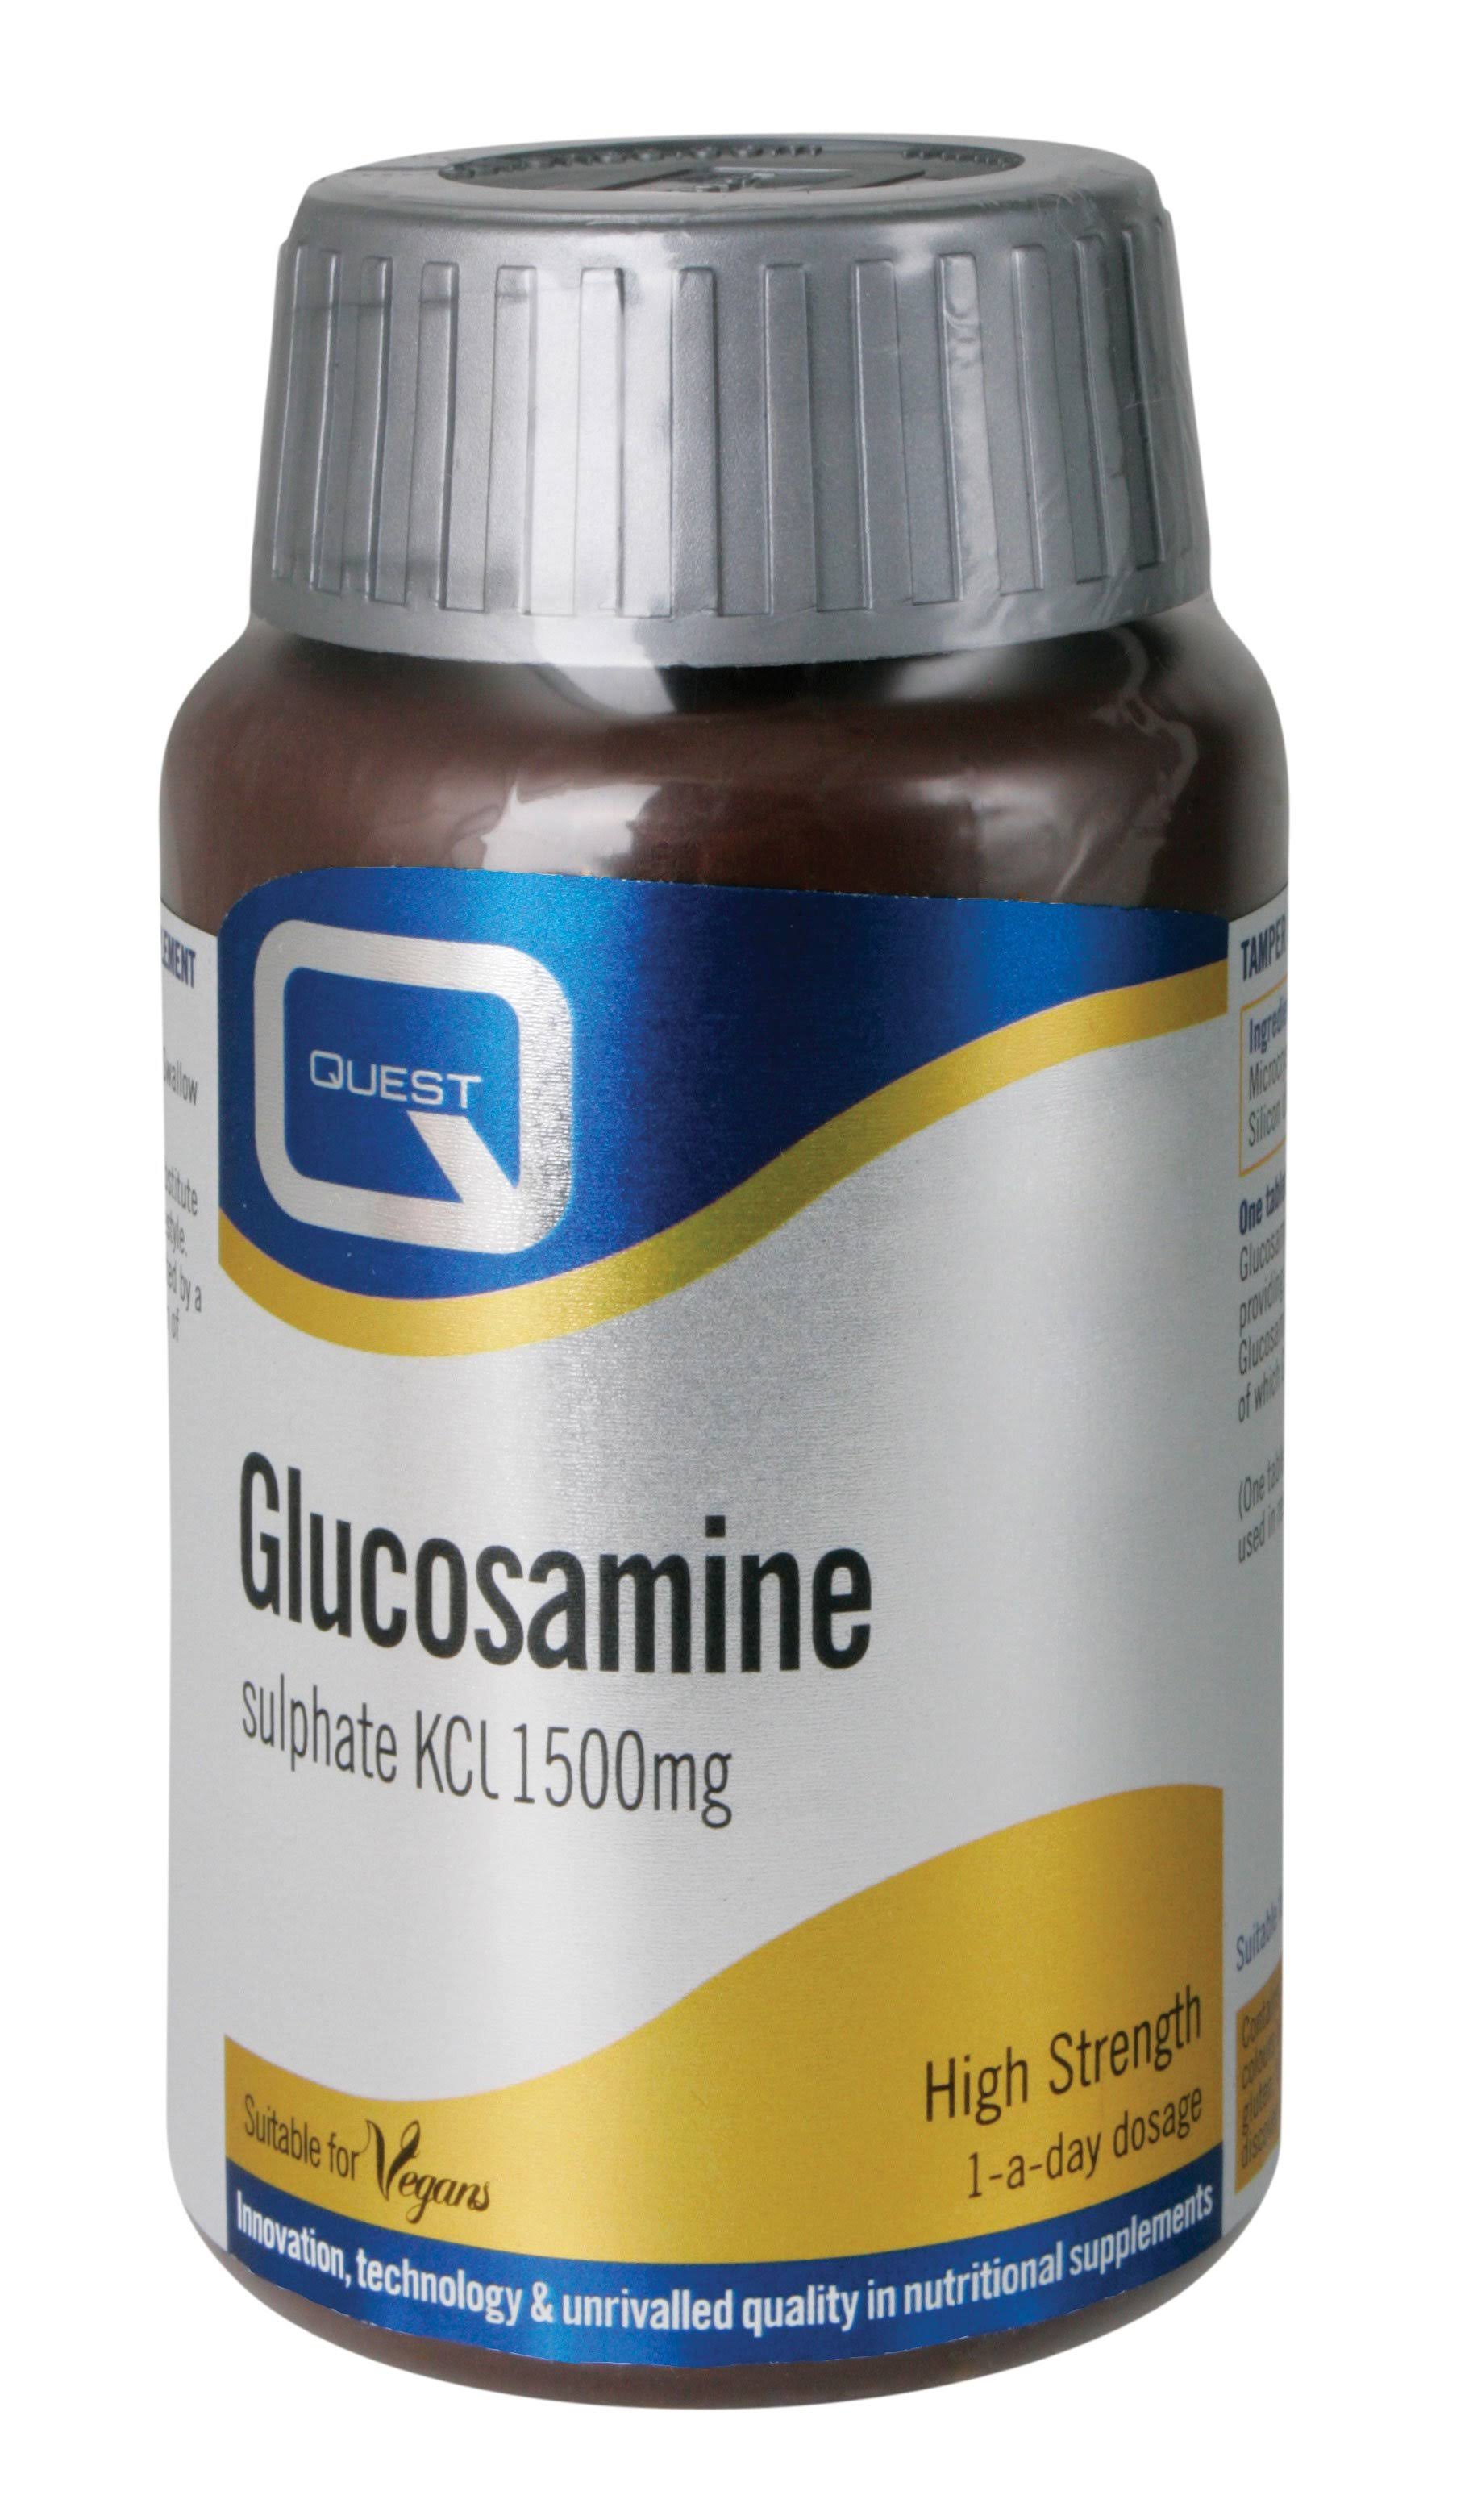 Quest Glucosamine Sulphate KCL Tablet - 60 Tablets